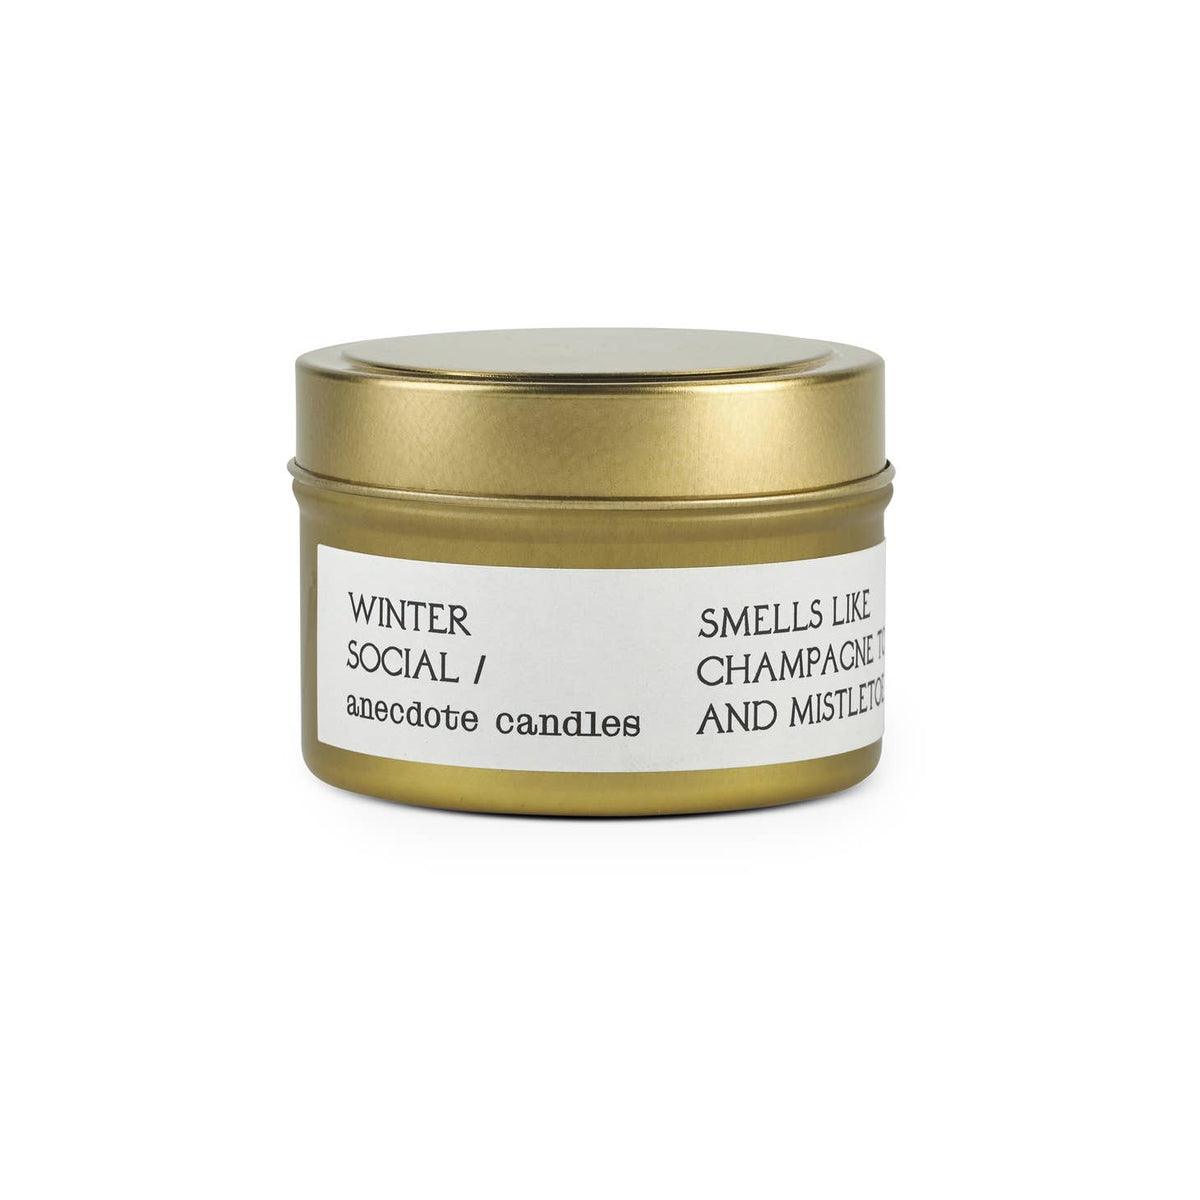 Winter Social Gold Tumbler Candle (Limited Edition) - 2 sizes-Anecdote-Crying Out Loud